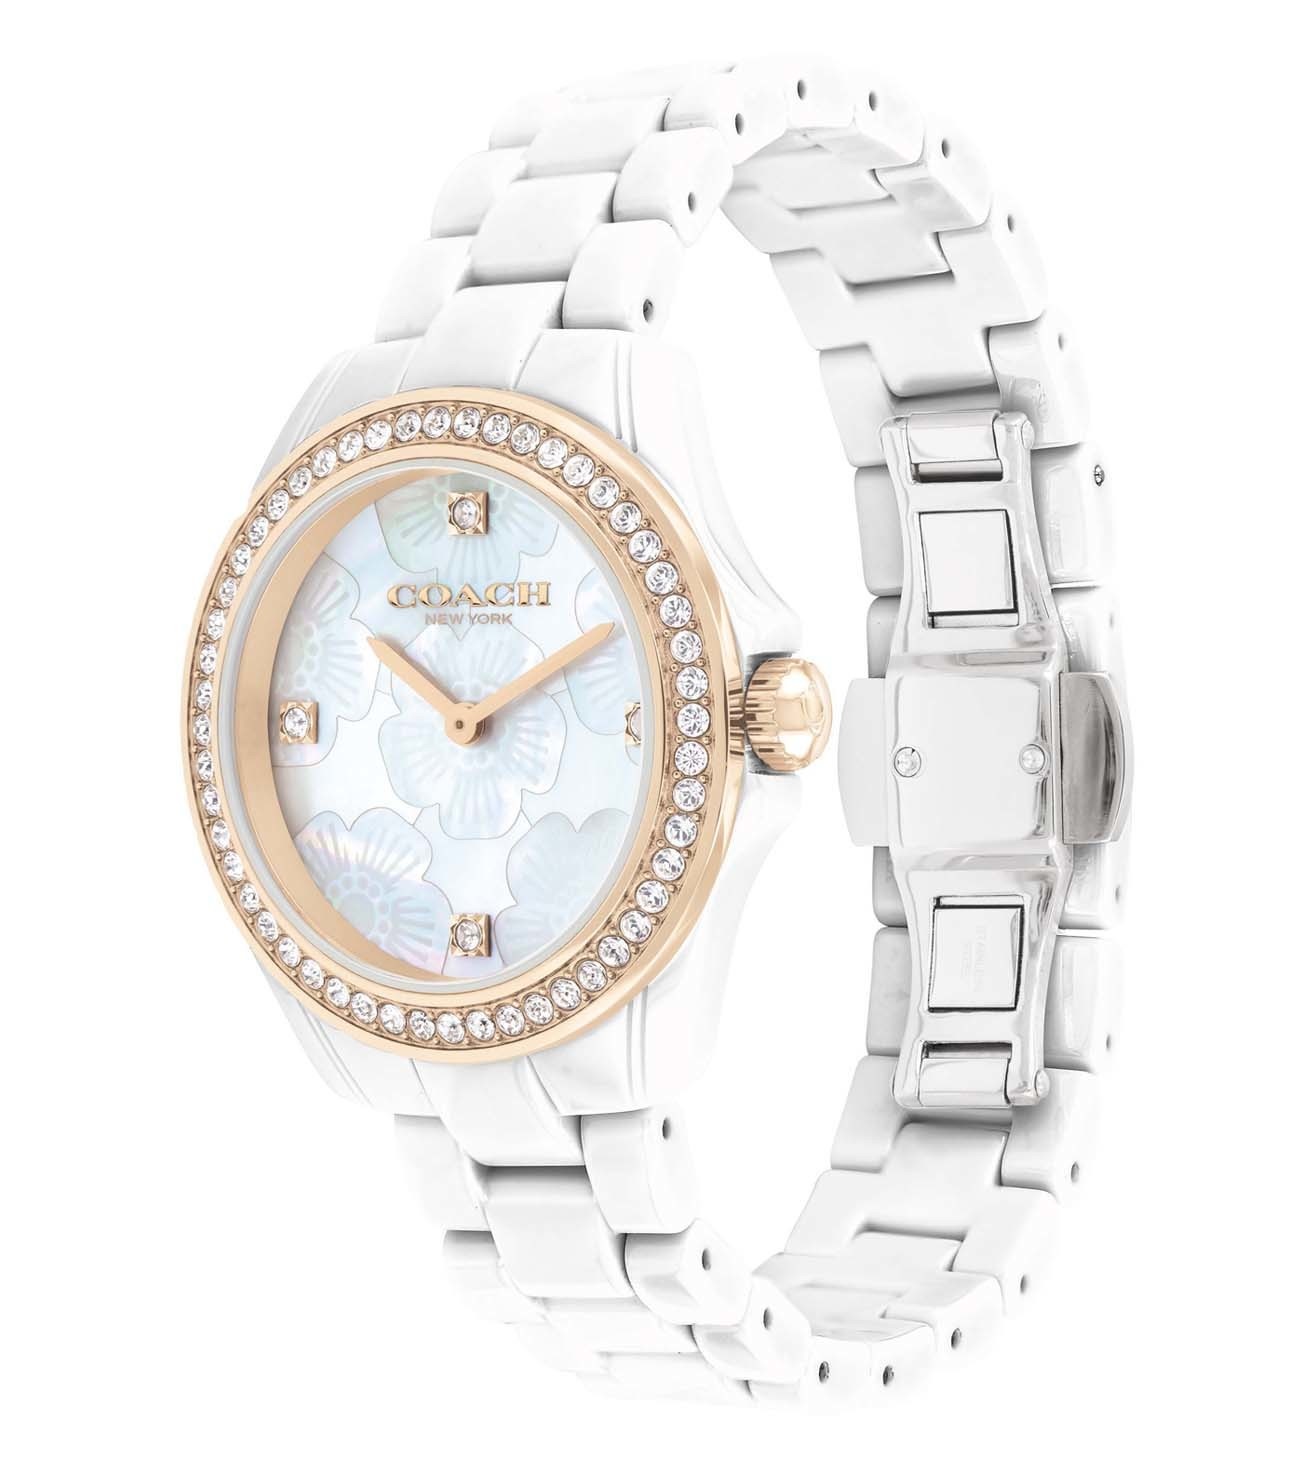 ĐỒNG HỒ COACH WOMENS 33.25 MM PRESTON MOTHER OF PEARL DIAL STAINLESS STEEL ANALOGUE WATCH 4